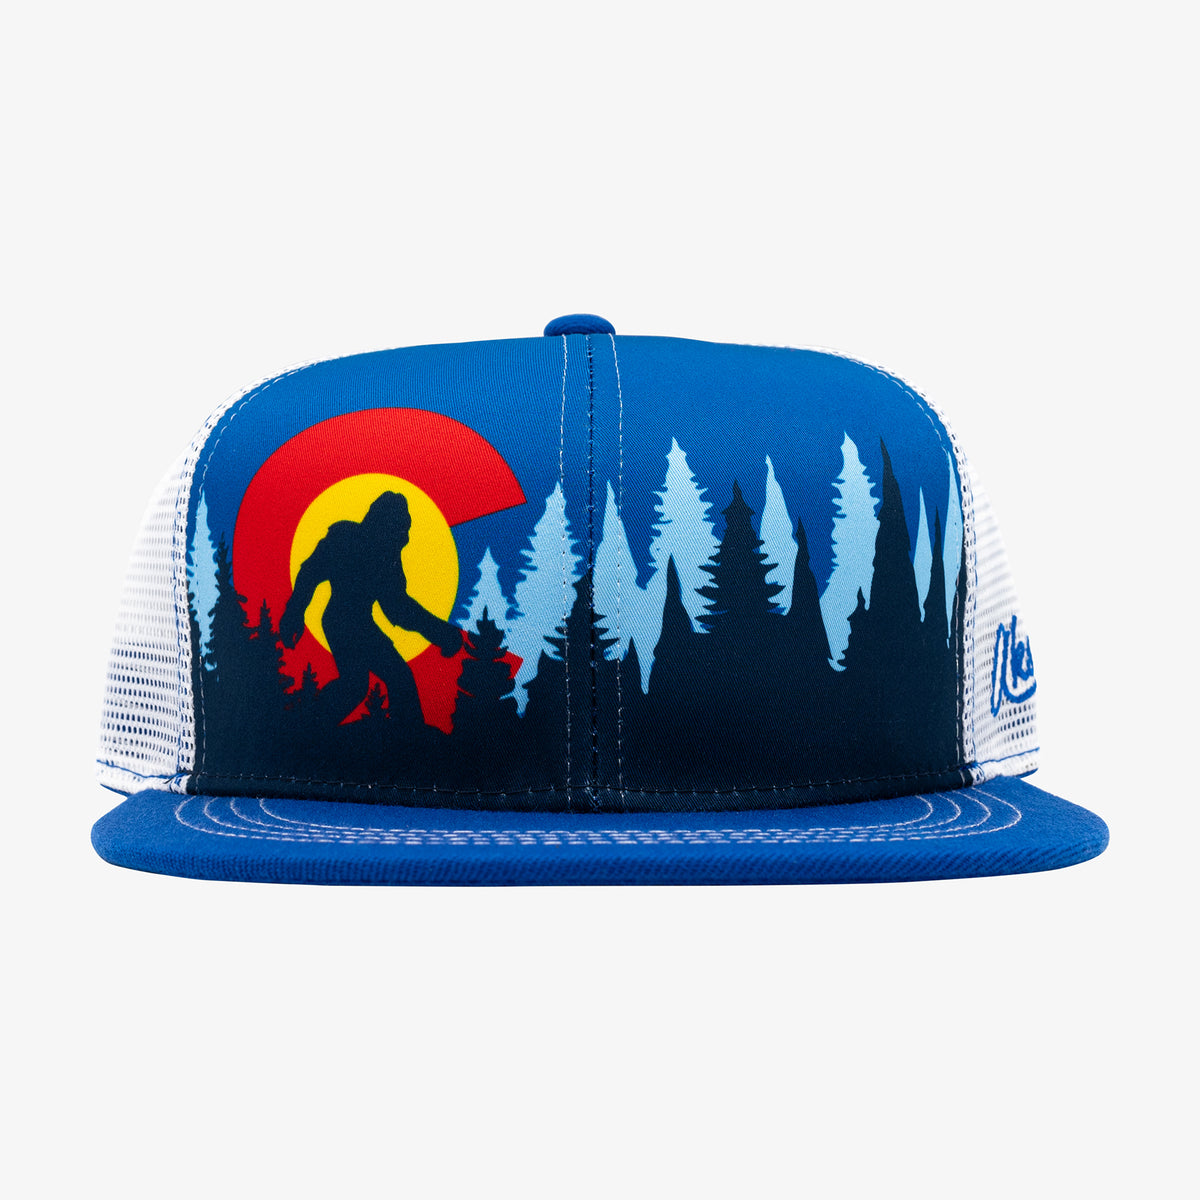 Aksels Colorado Bigfoot Trucker Hat for Adults - Made with Premium Materials Royal